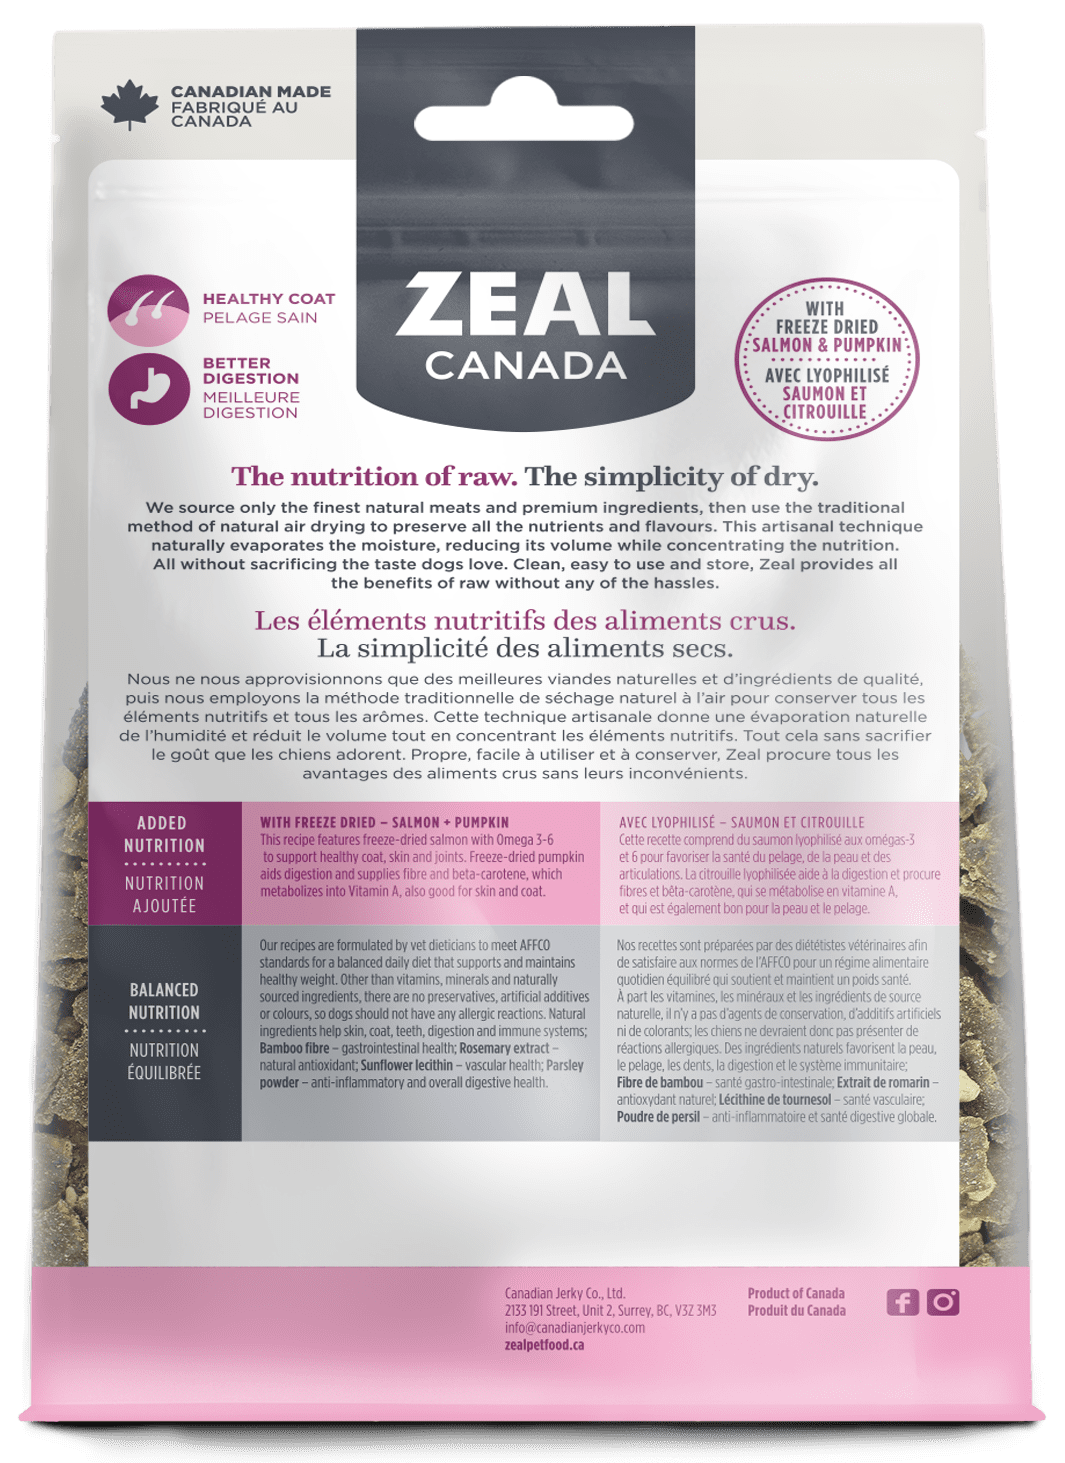 Zeal Canada - Gently Air-Dried Turkey with Freeze-Dried Salmon & Pumpkin (For Dogs